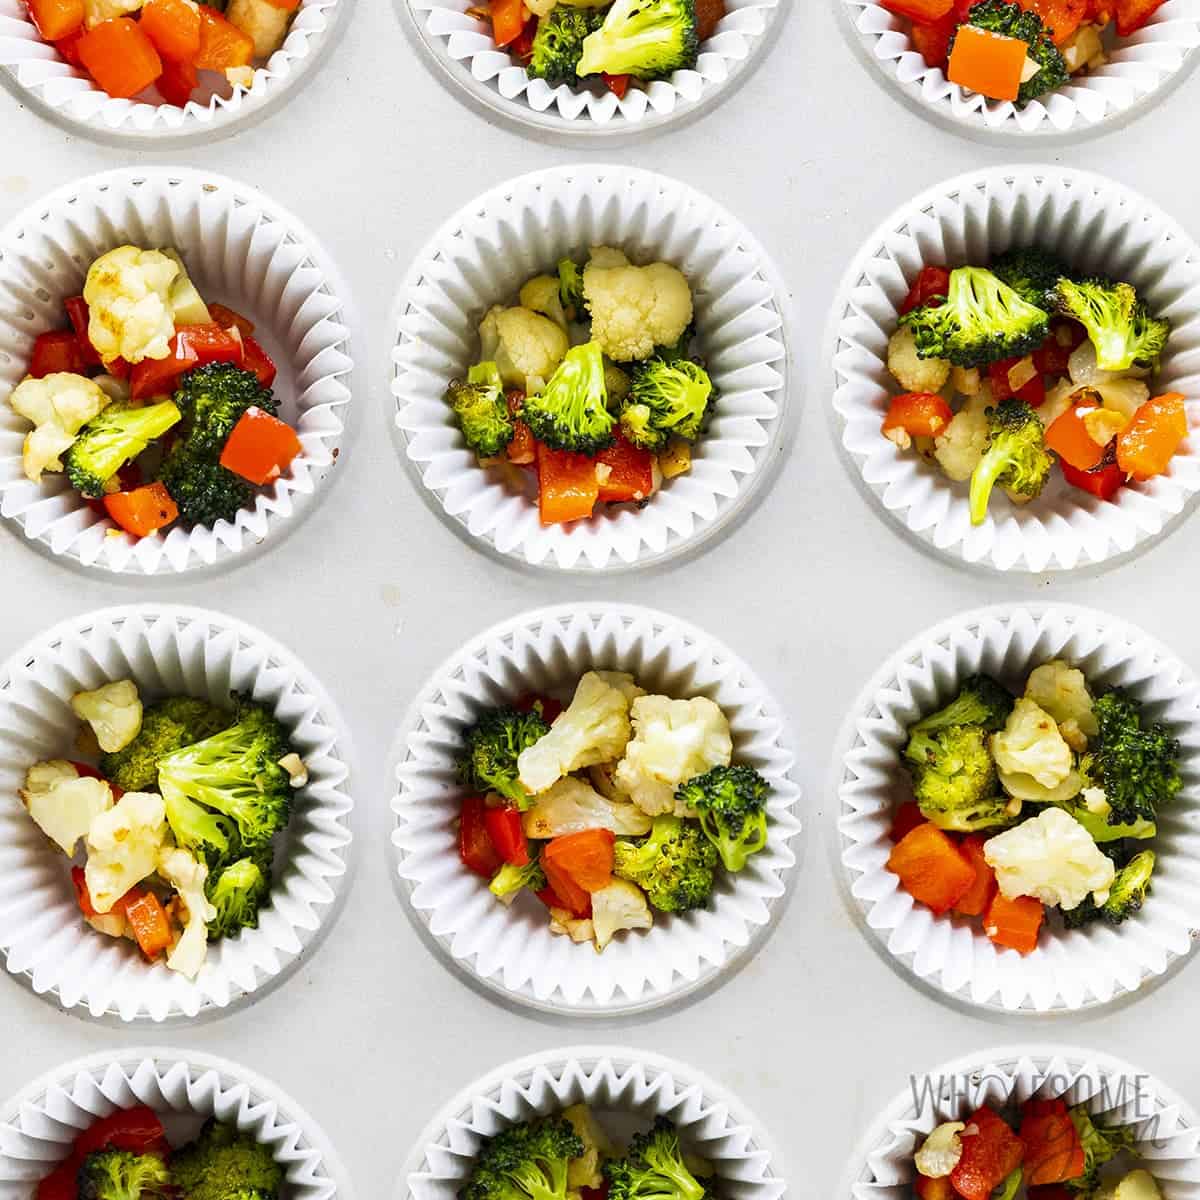 Muffin tin filled with roasted vegetables.